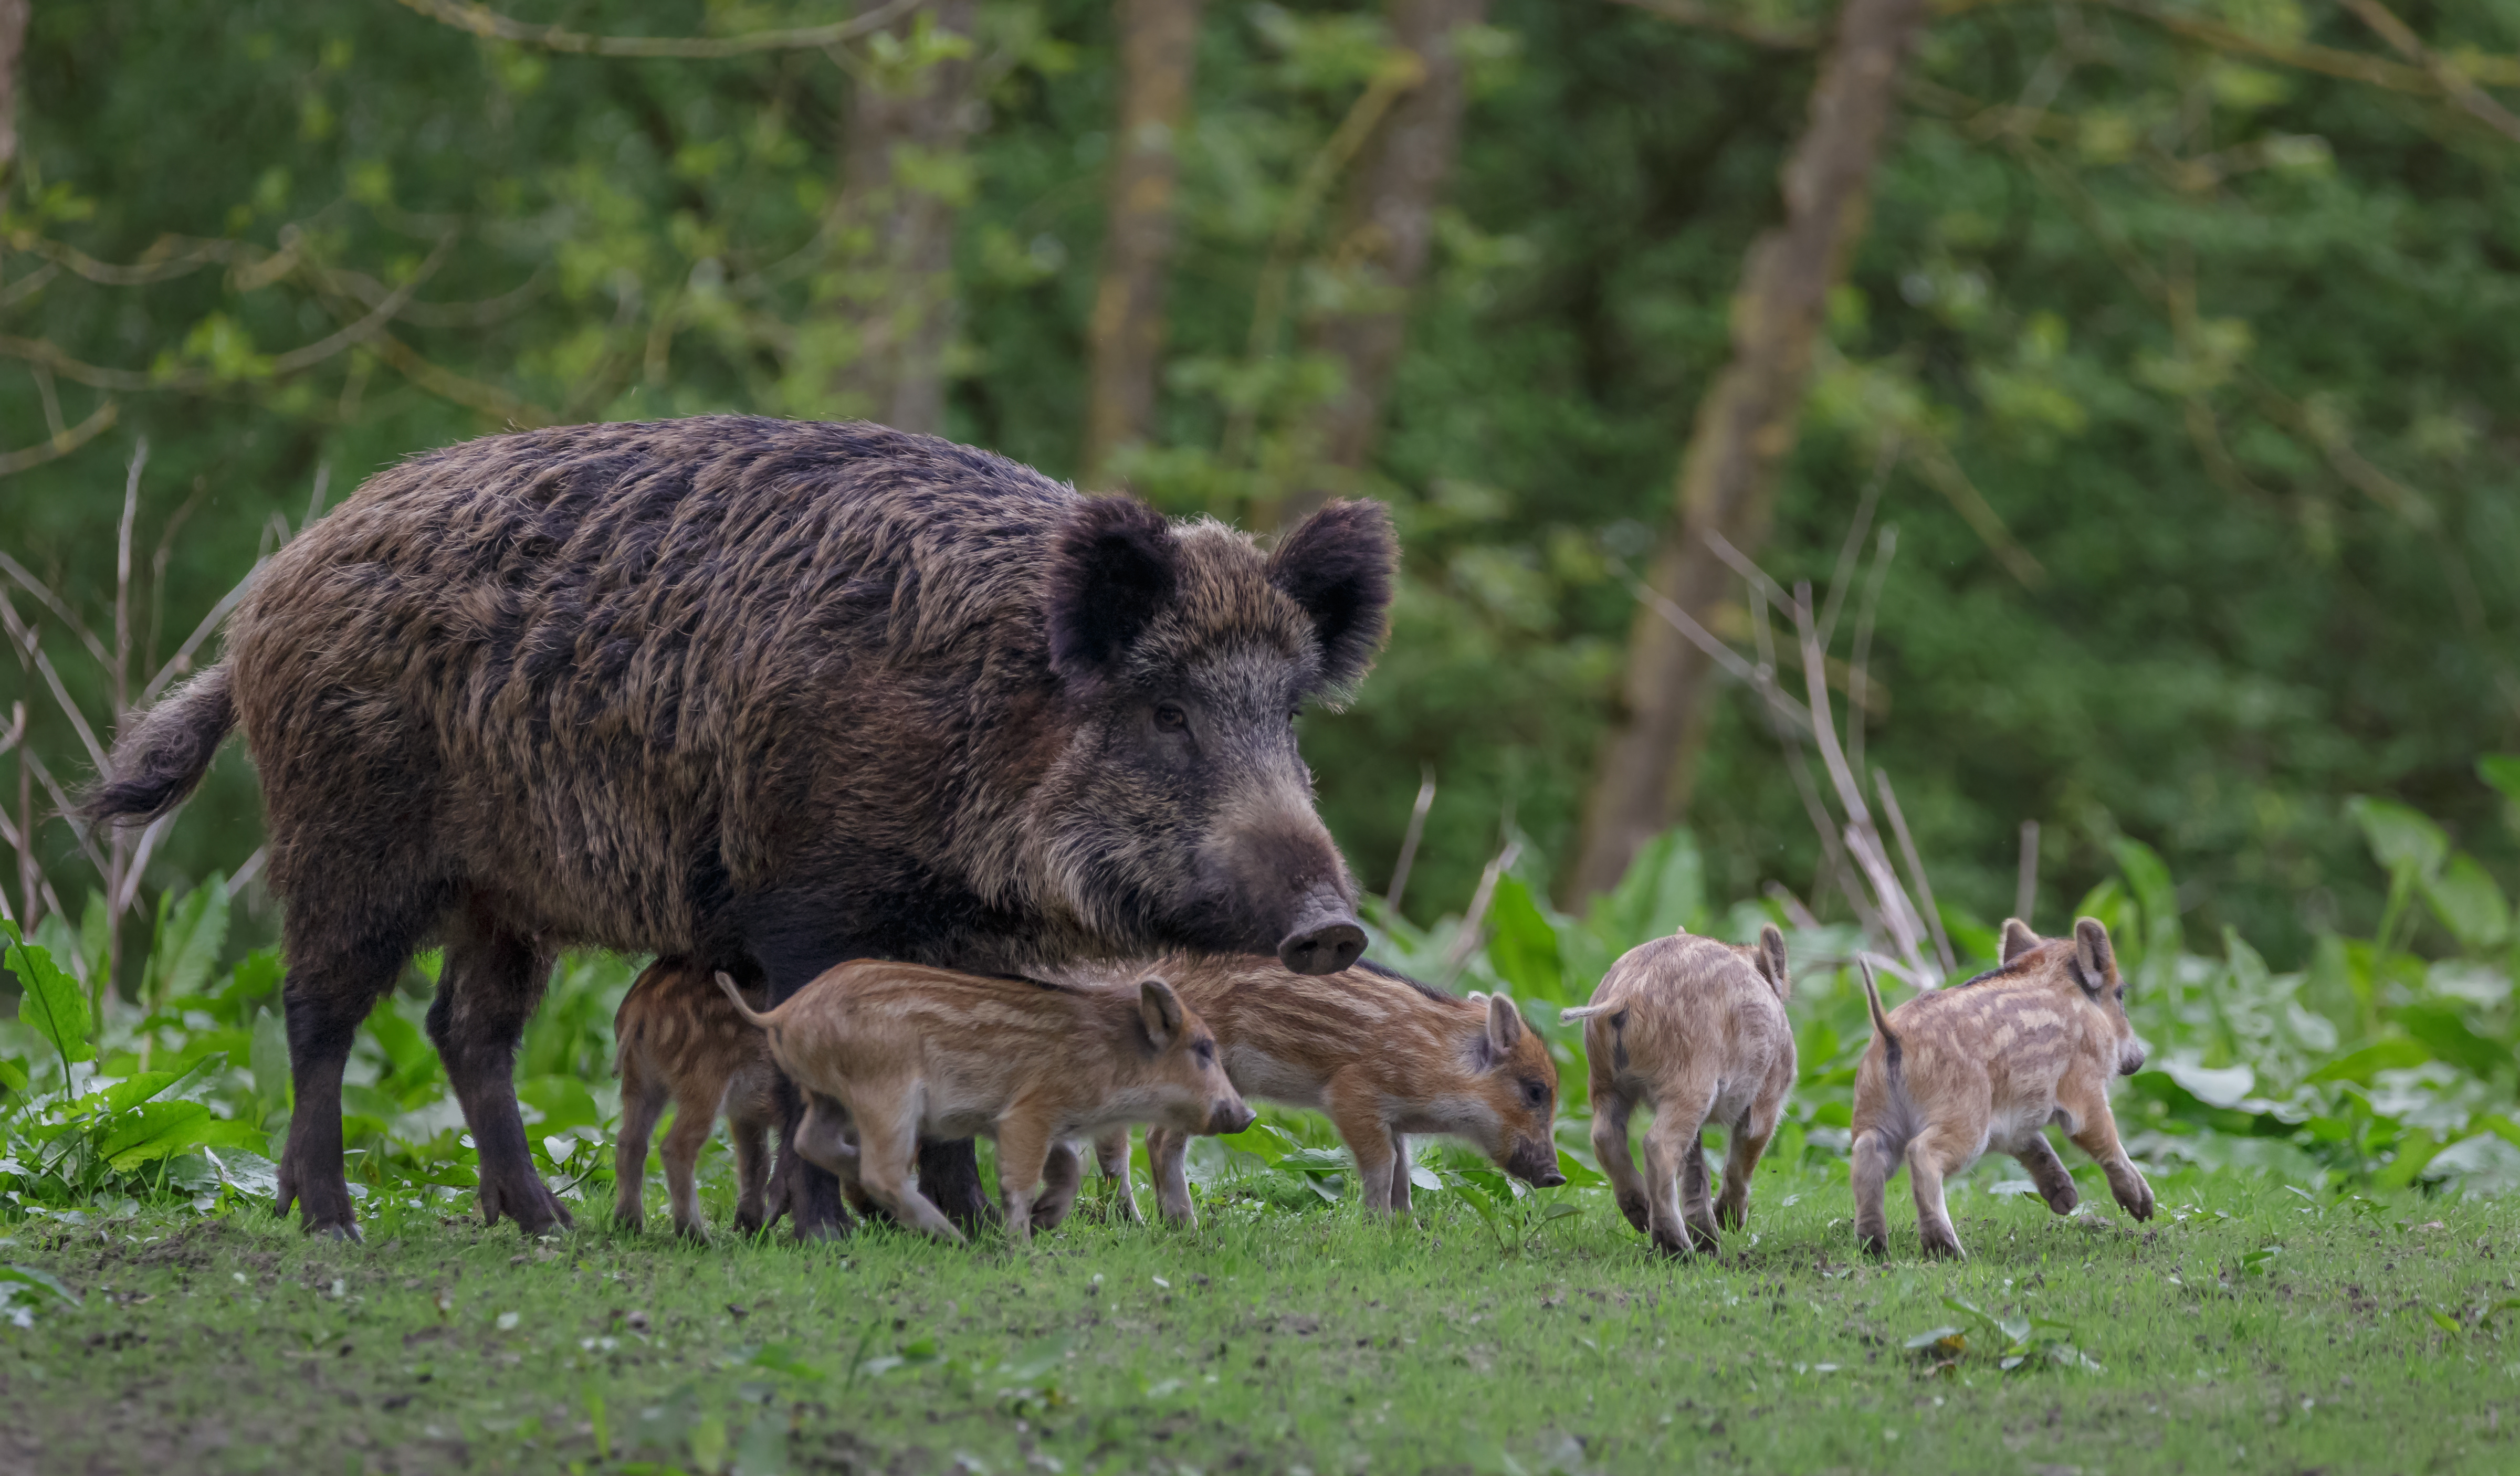 a wild pig stands with its piglets in a field